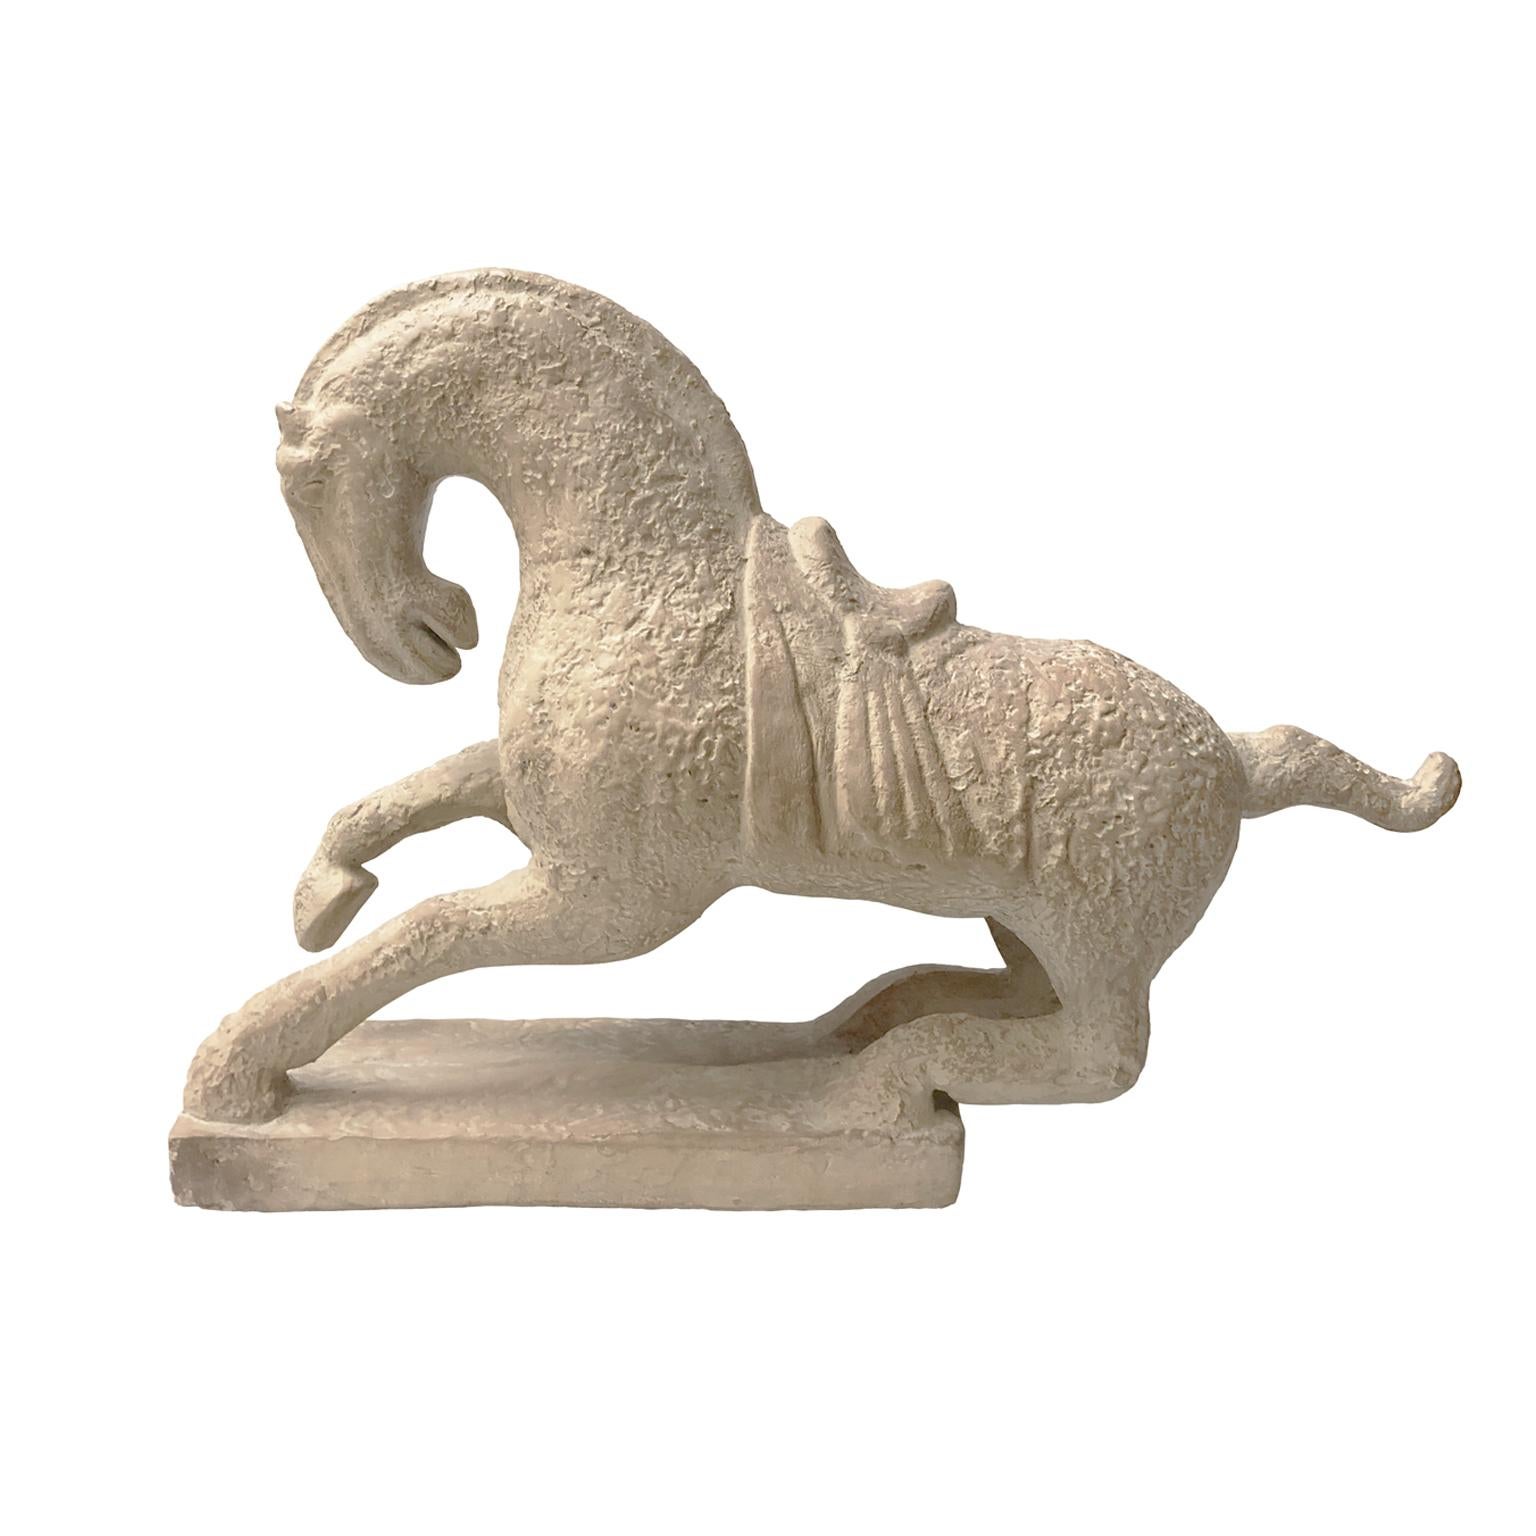 Tang Dynasty-style rearing horse sculpture by Austin Productions. USA, 1970s.